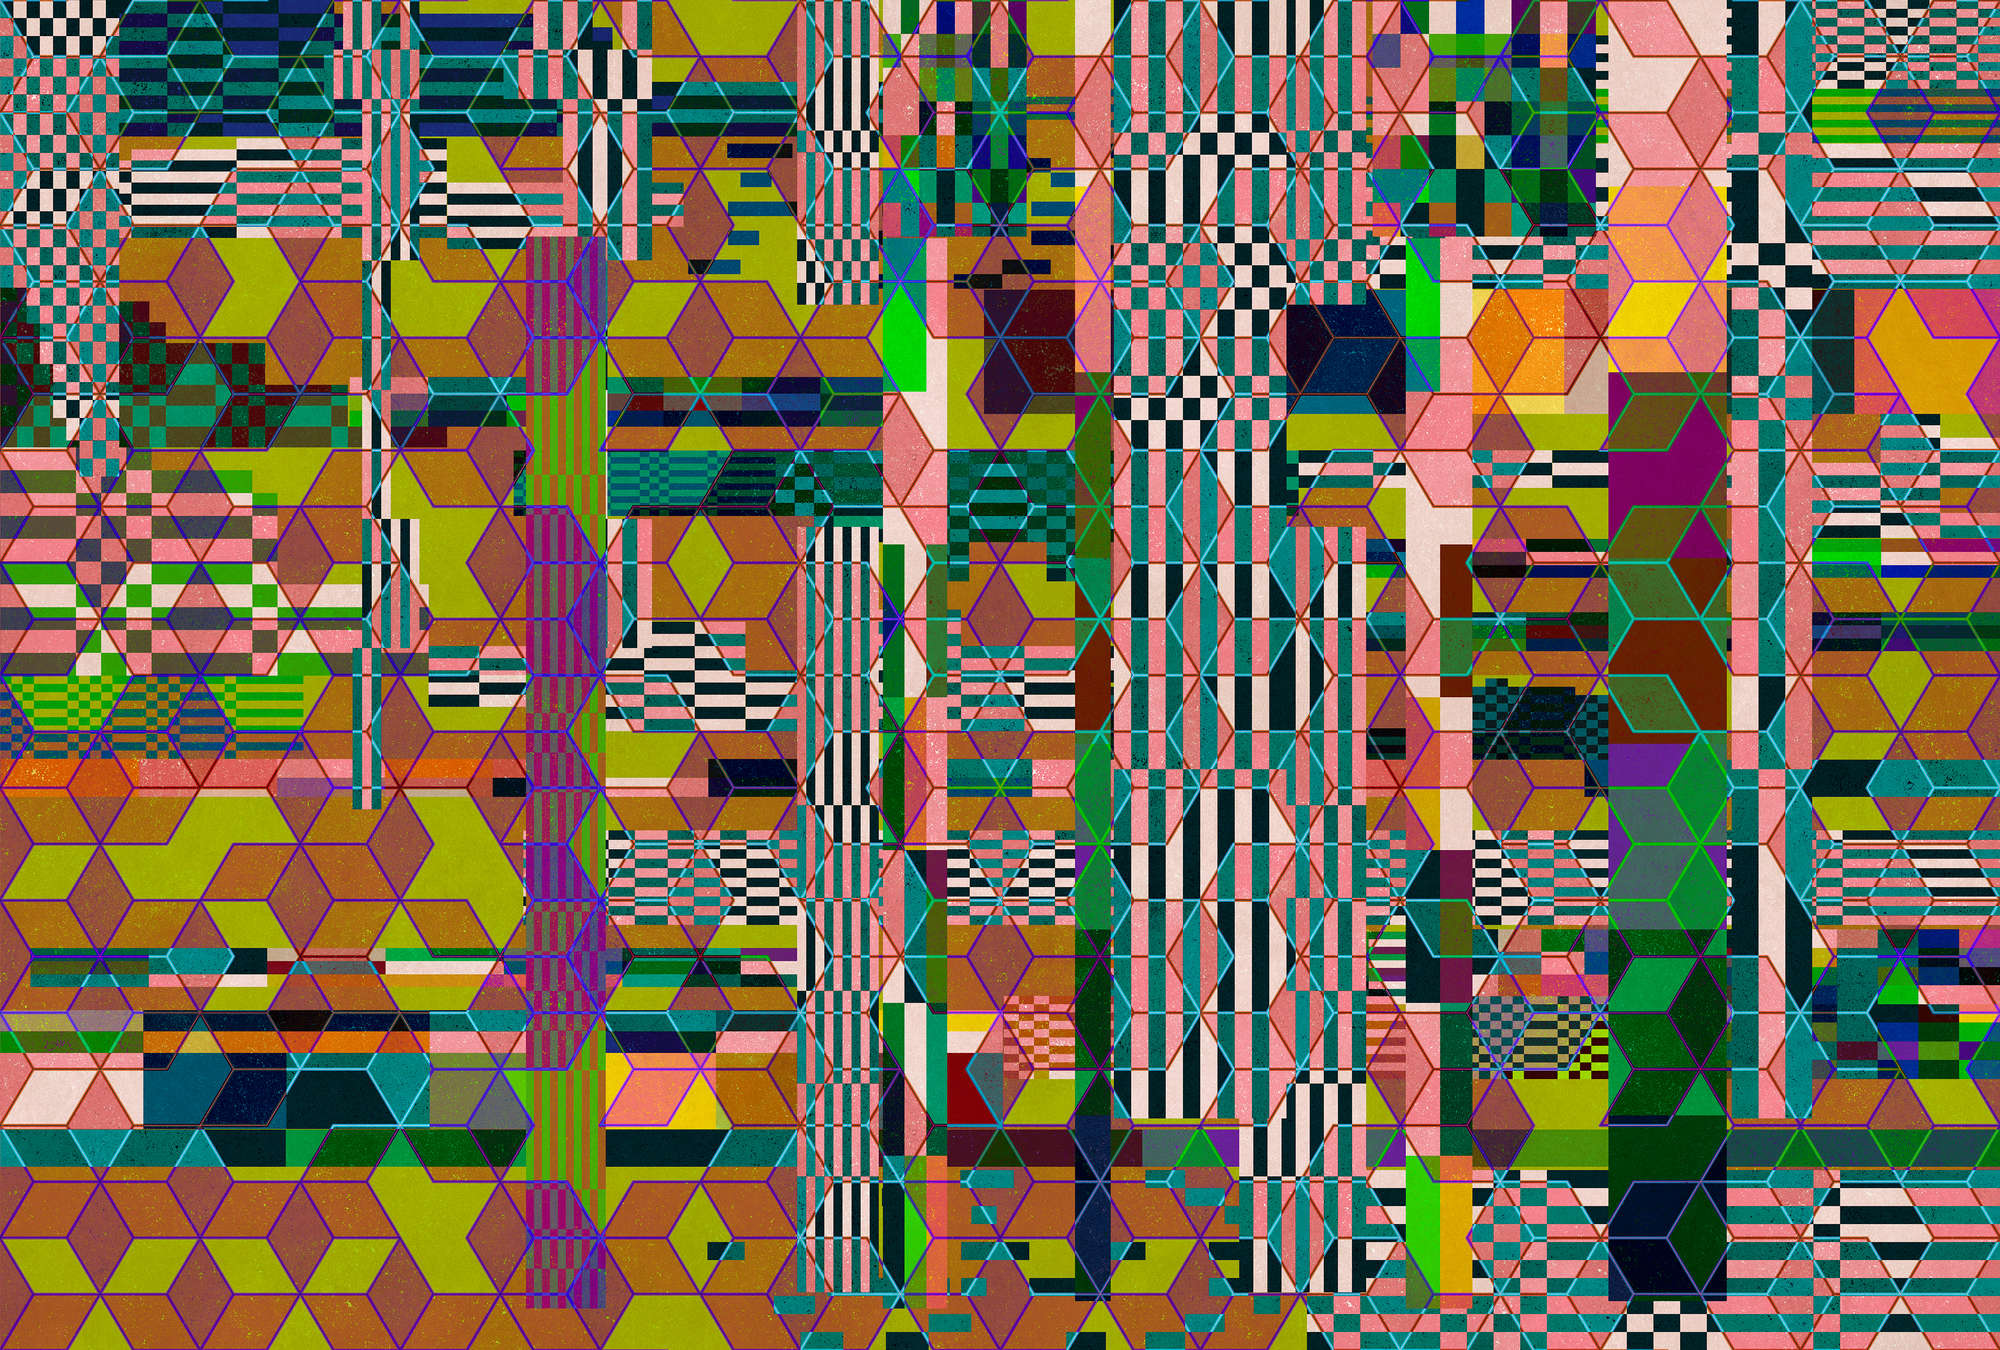             Mirage 1 - mural graphic mosaic pattern colourful
        